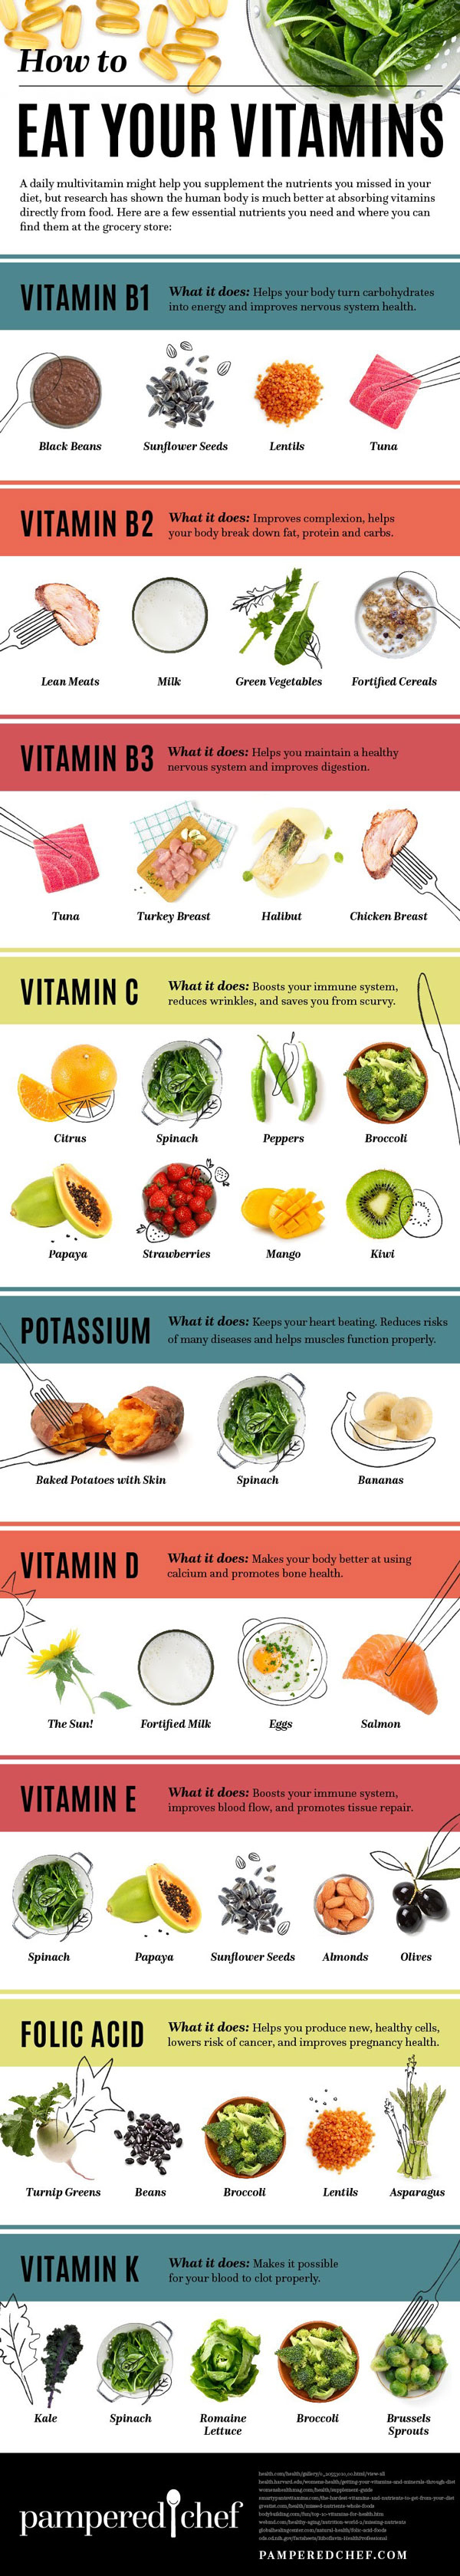 How to Eat Your Vitamins [Infographic] - Best Infographics